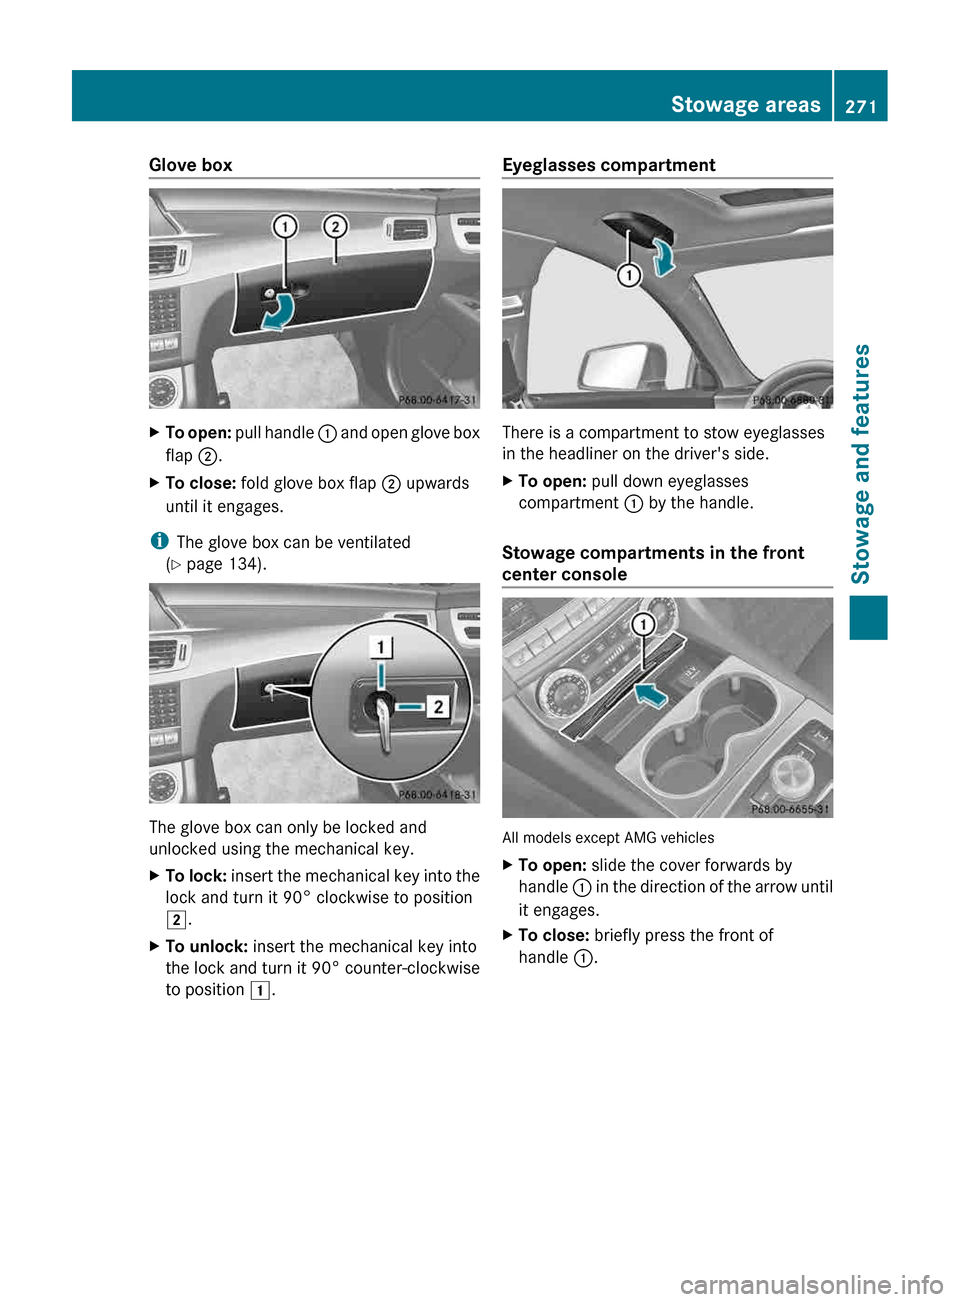 MERCEDES-BENZ CLS-Class 2013 W218 Owners Guide Glove box
X
To open: pull handle  : and open glove box
flap  ;.
X To close:  fold glove box flap  ; upwards
until it engages.
i The glove box can be ventilated
(Y page 134). The glove box can only be 